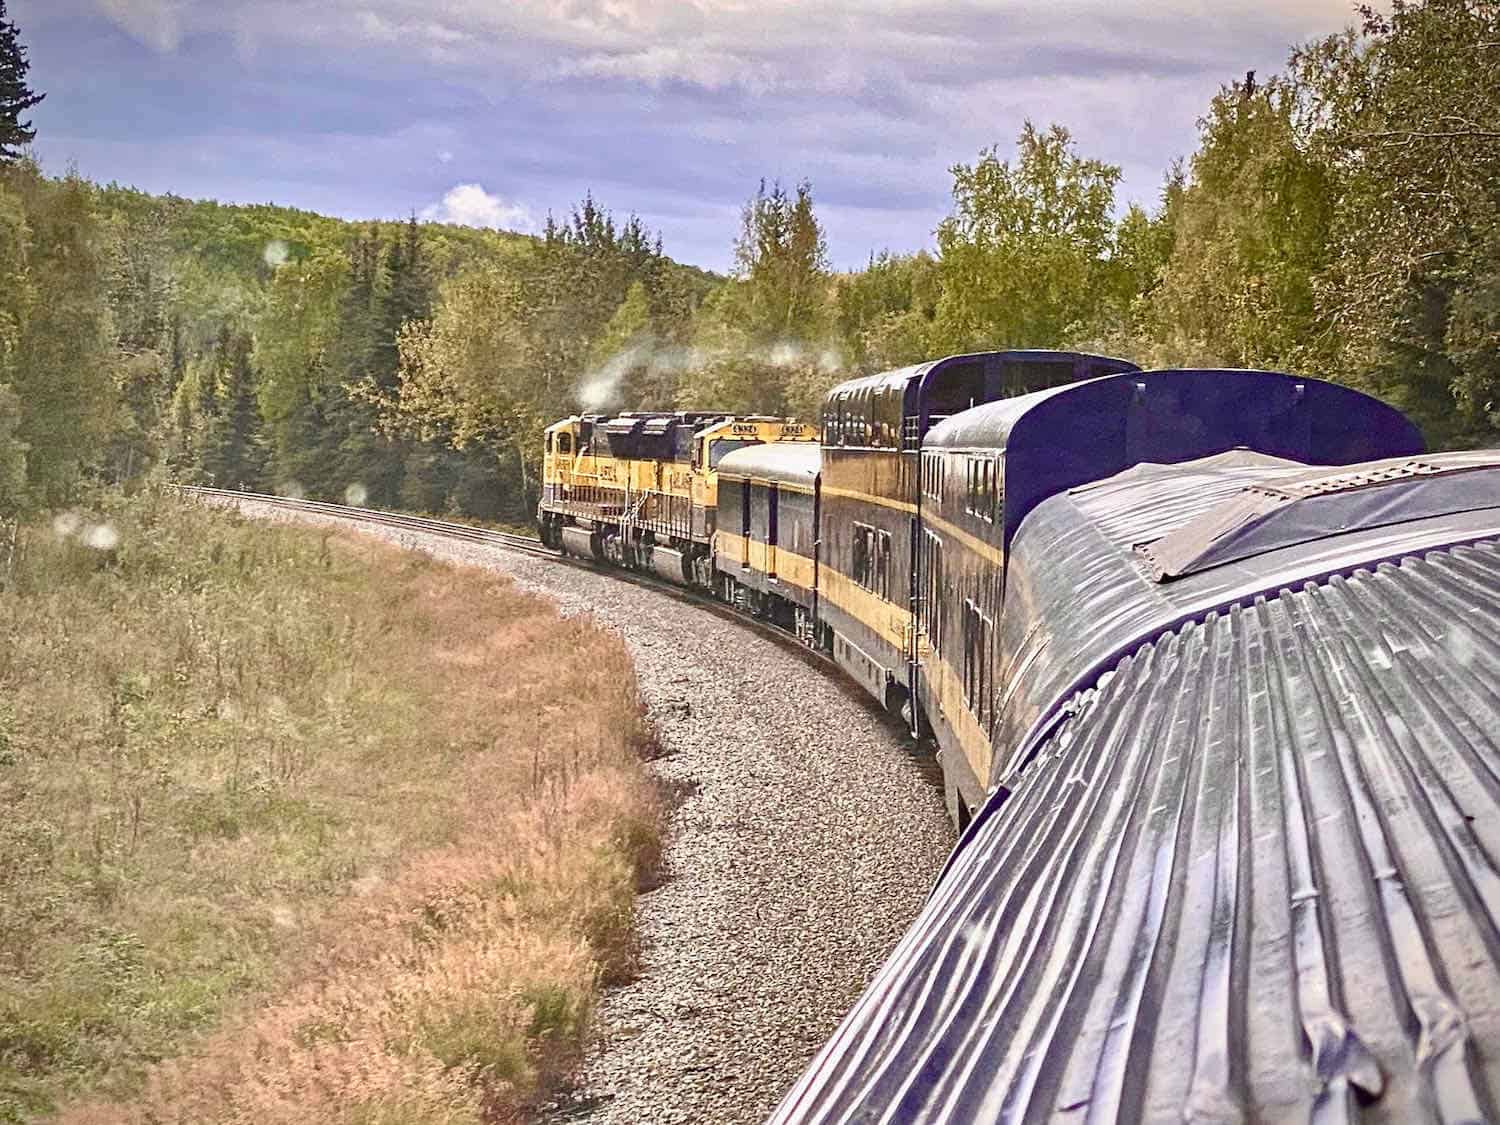 train from Fairbanks to Denali on the tracks with steam coming from engine.